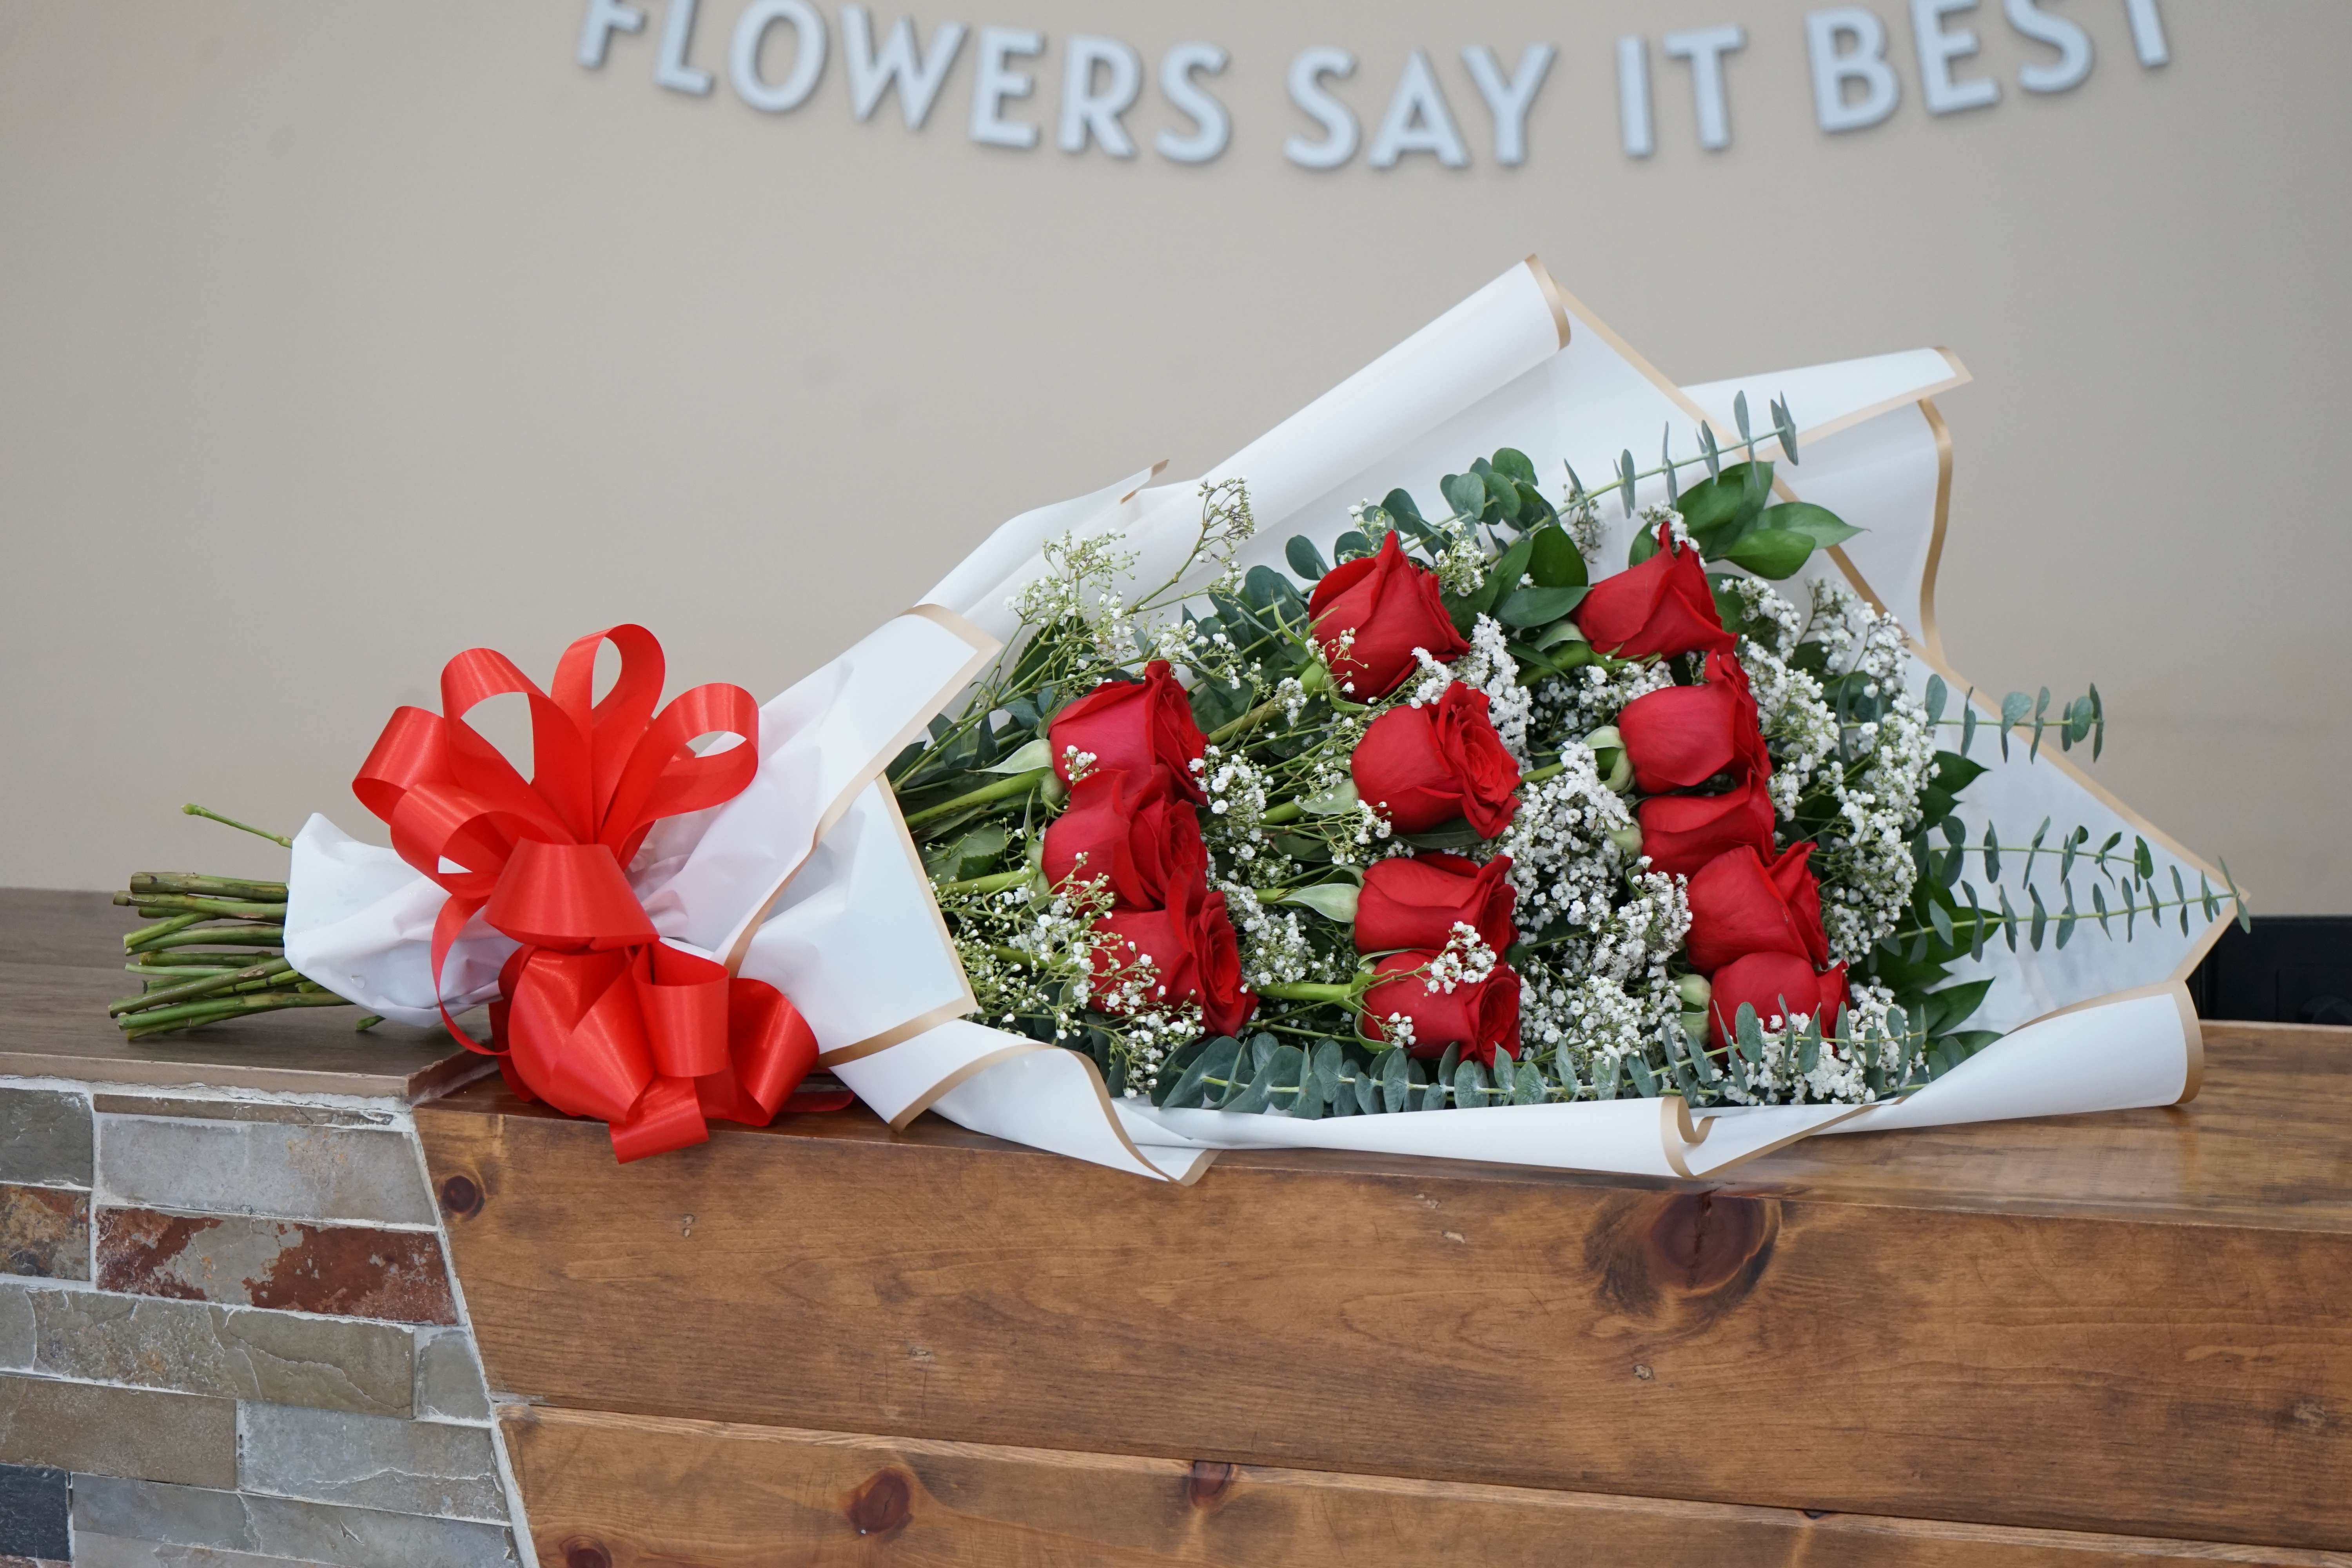 Dozen Red Roses Cascading Bouquet - Dozen red roses(or another color if you wish), wrapped in cascading fashion to give more volume to the bouquet. Elegance in simplicity. Item can be customized if you wish to give us a call at 832 916 3636. Thank you!